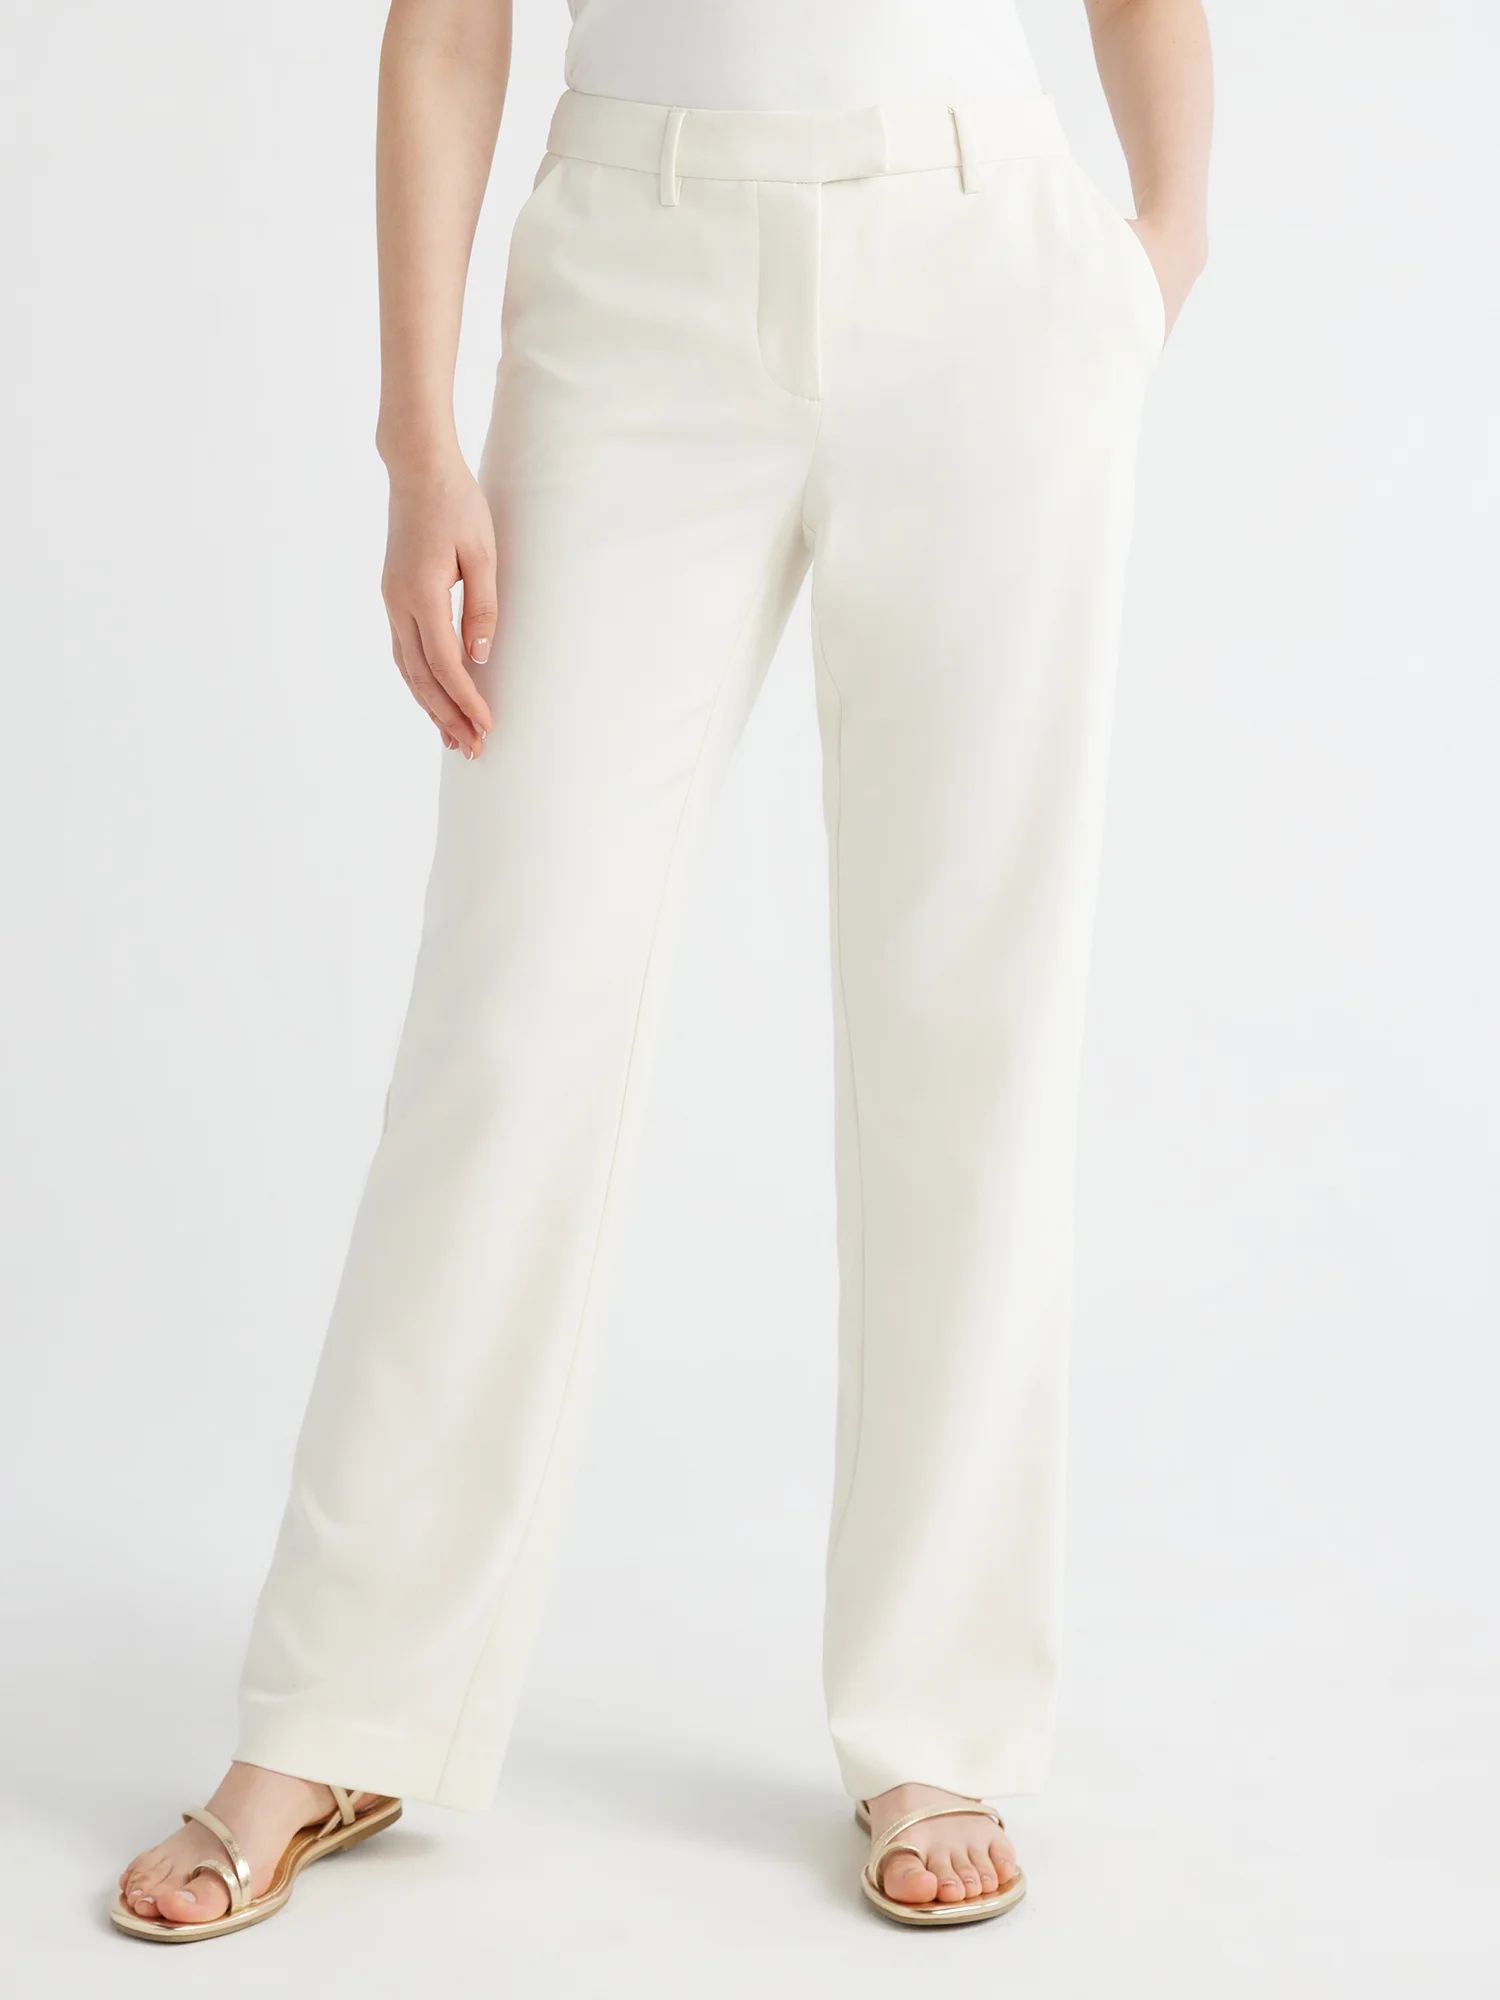 Scoop Women's Ultimate Stovepipe Crepe Suit Pants with Straight Leg, Sizes 0-18, 32’’ Inseam | Walmart (US)